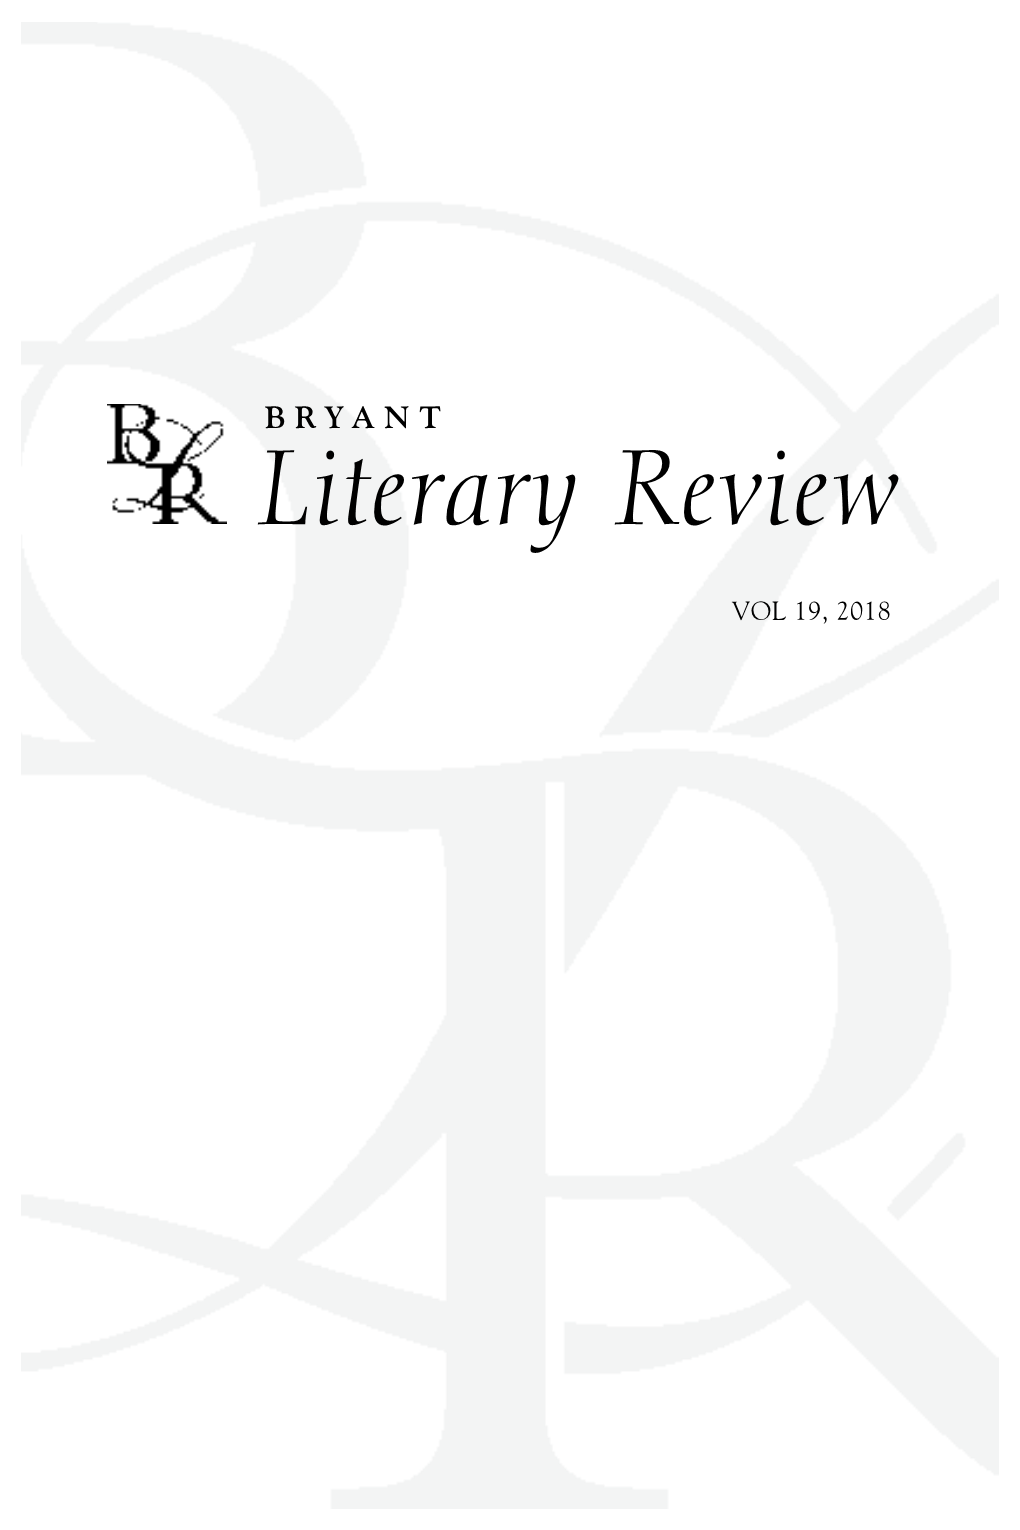 To See the 2018 Bryant Literary Review